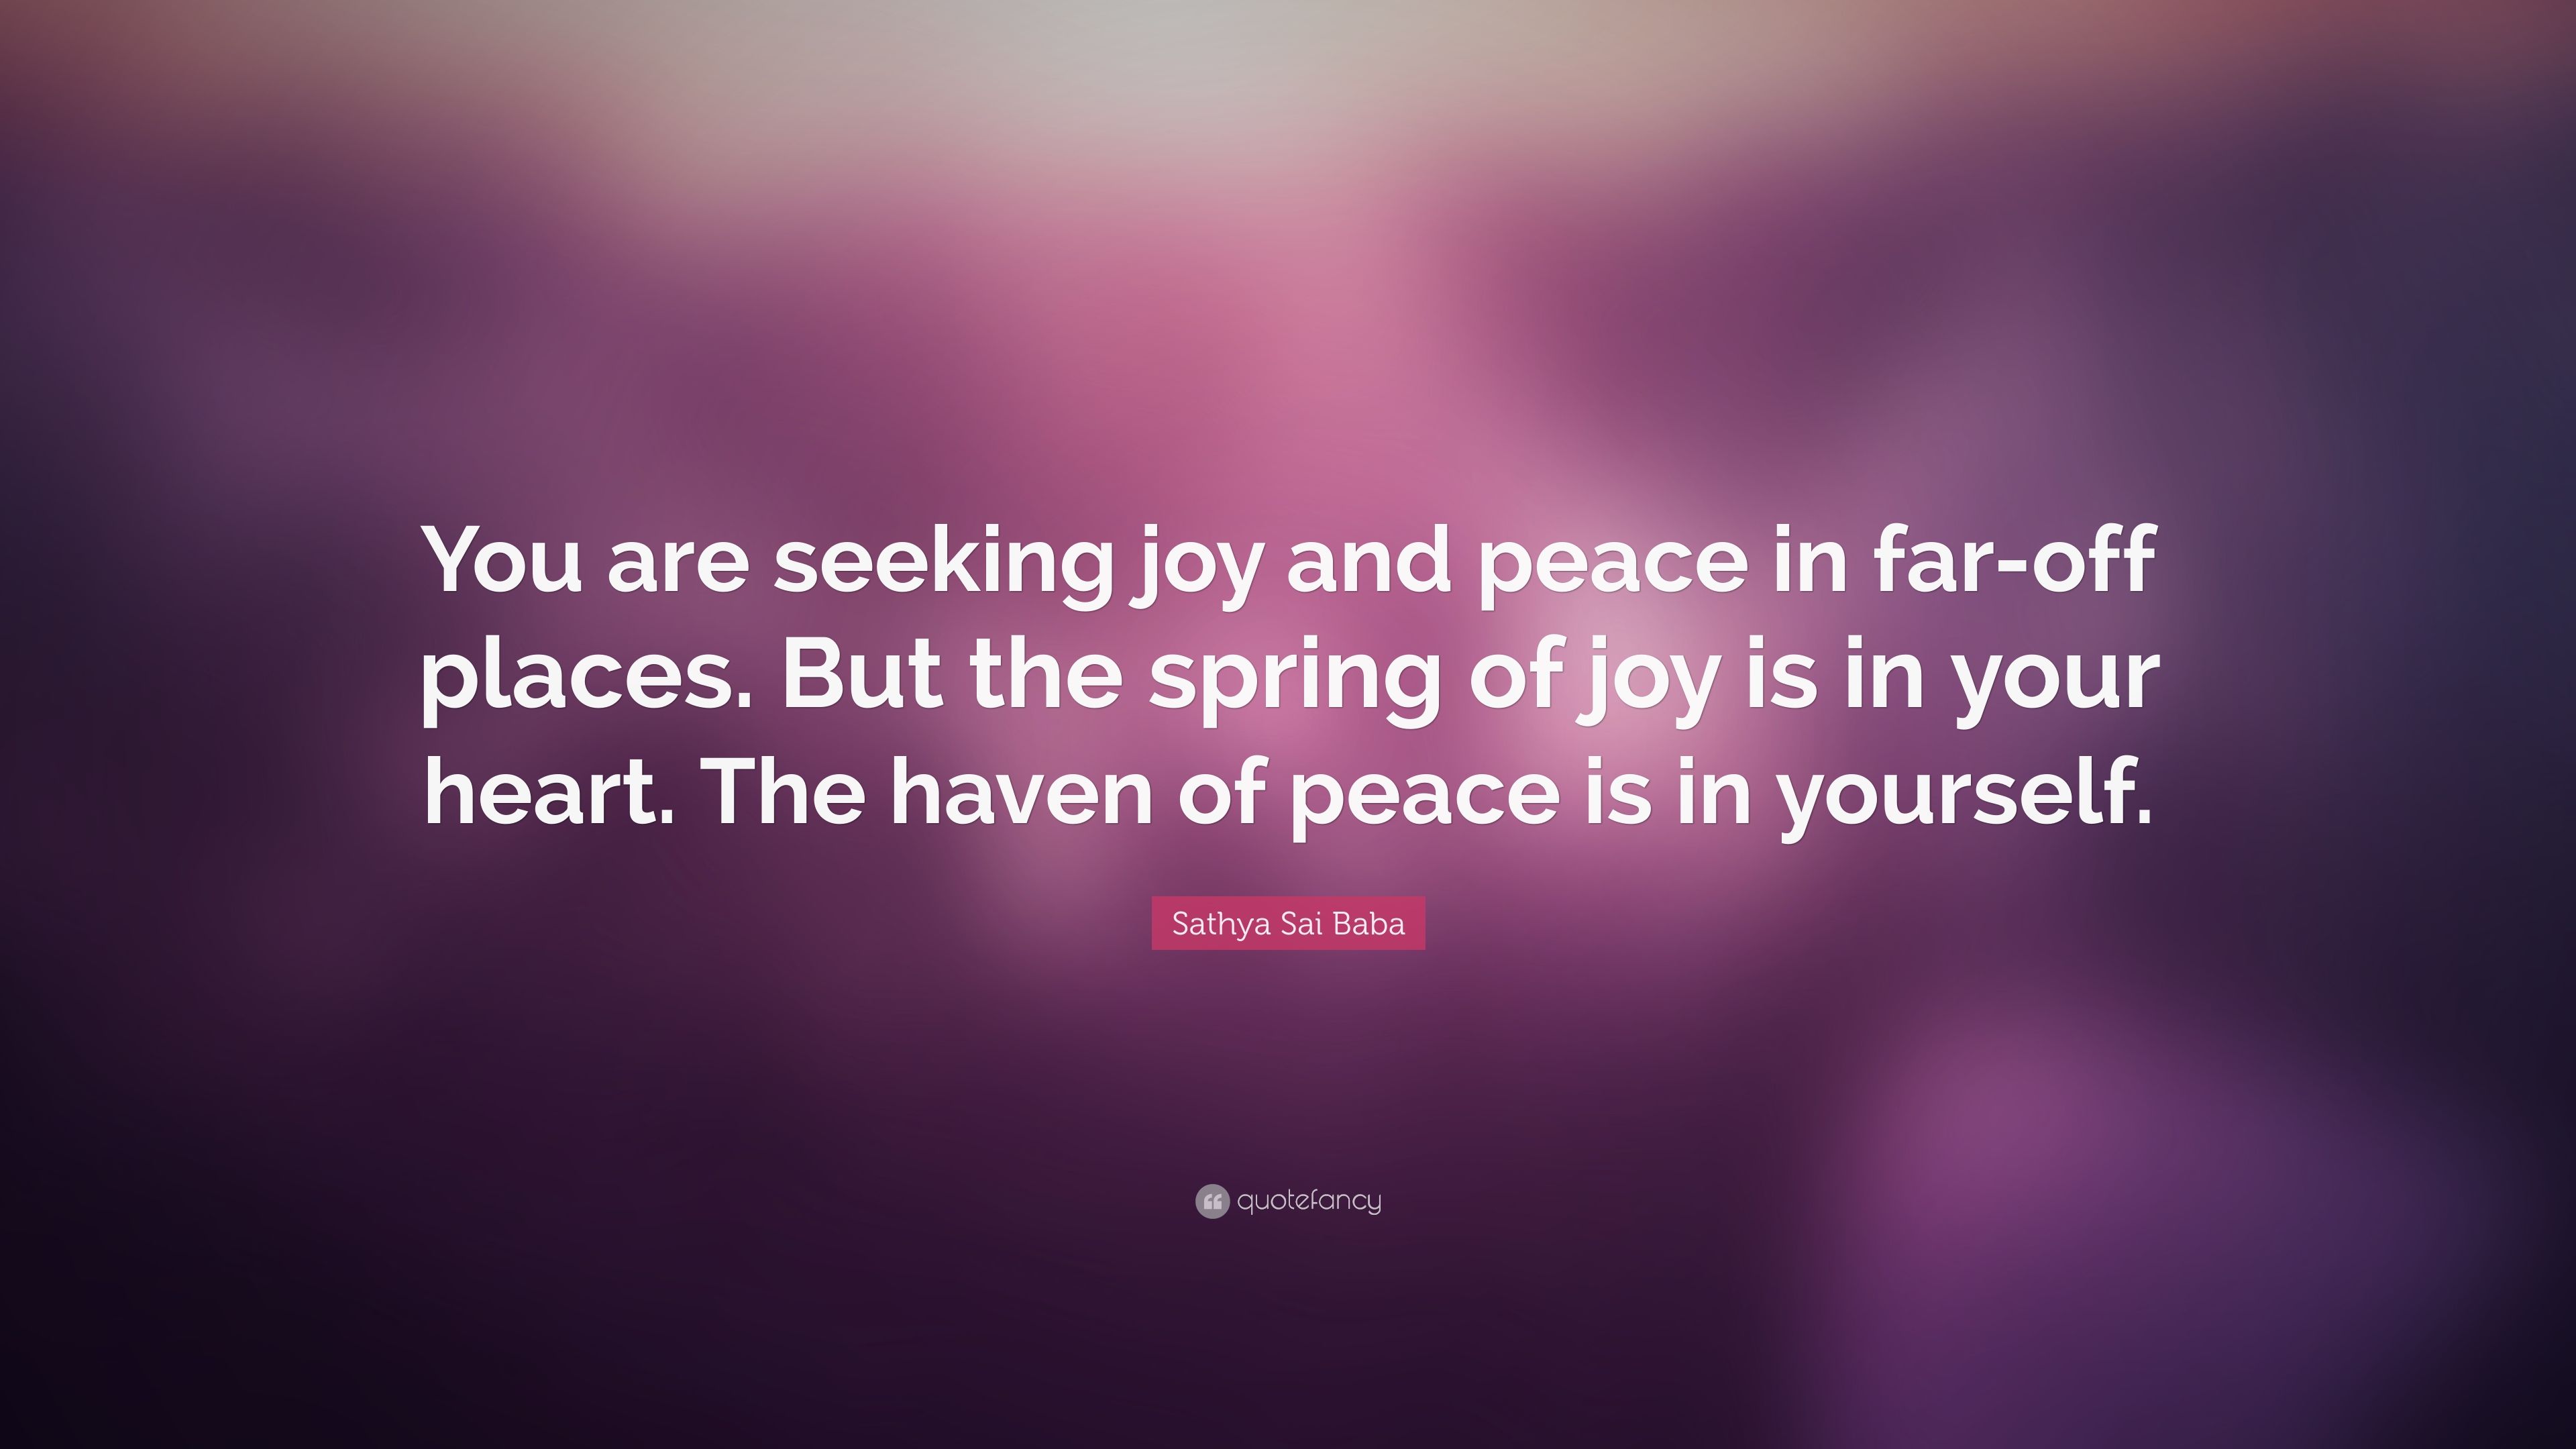 Sathya Sai Baba Quote: “You Are Seeking Joy And Peace In Far Off